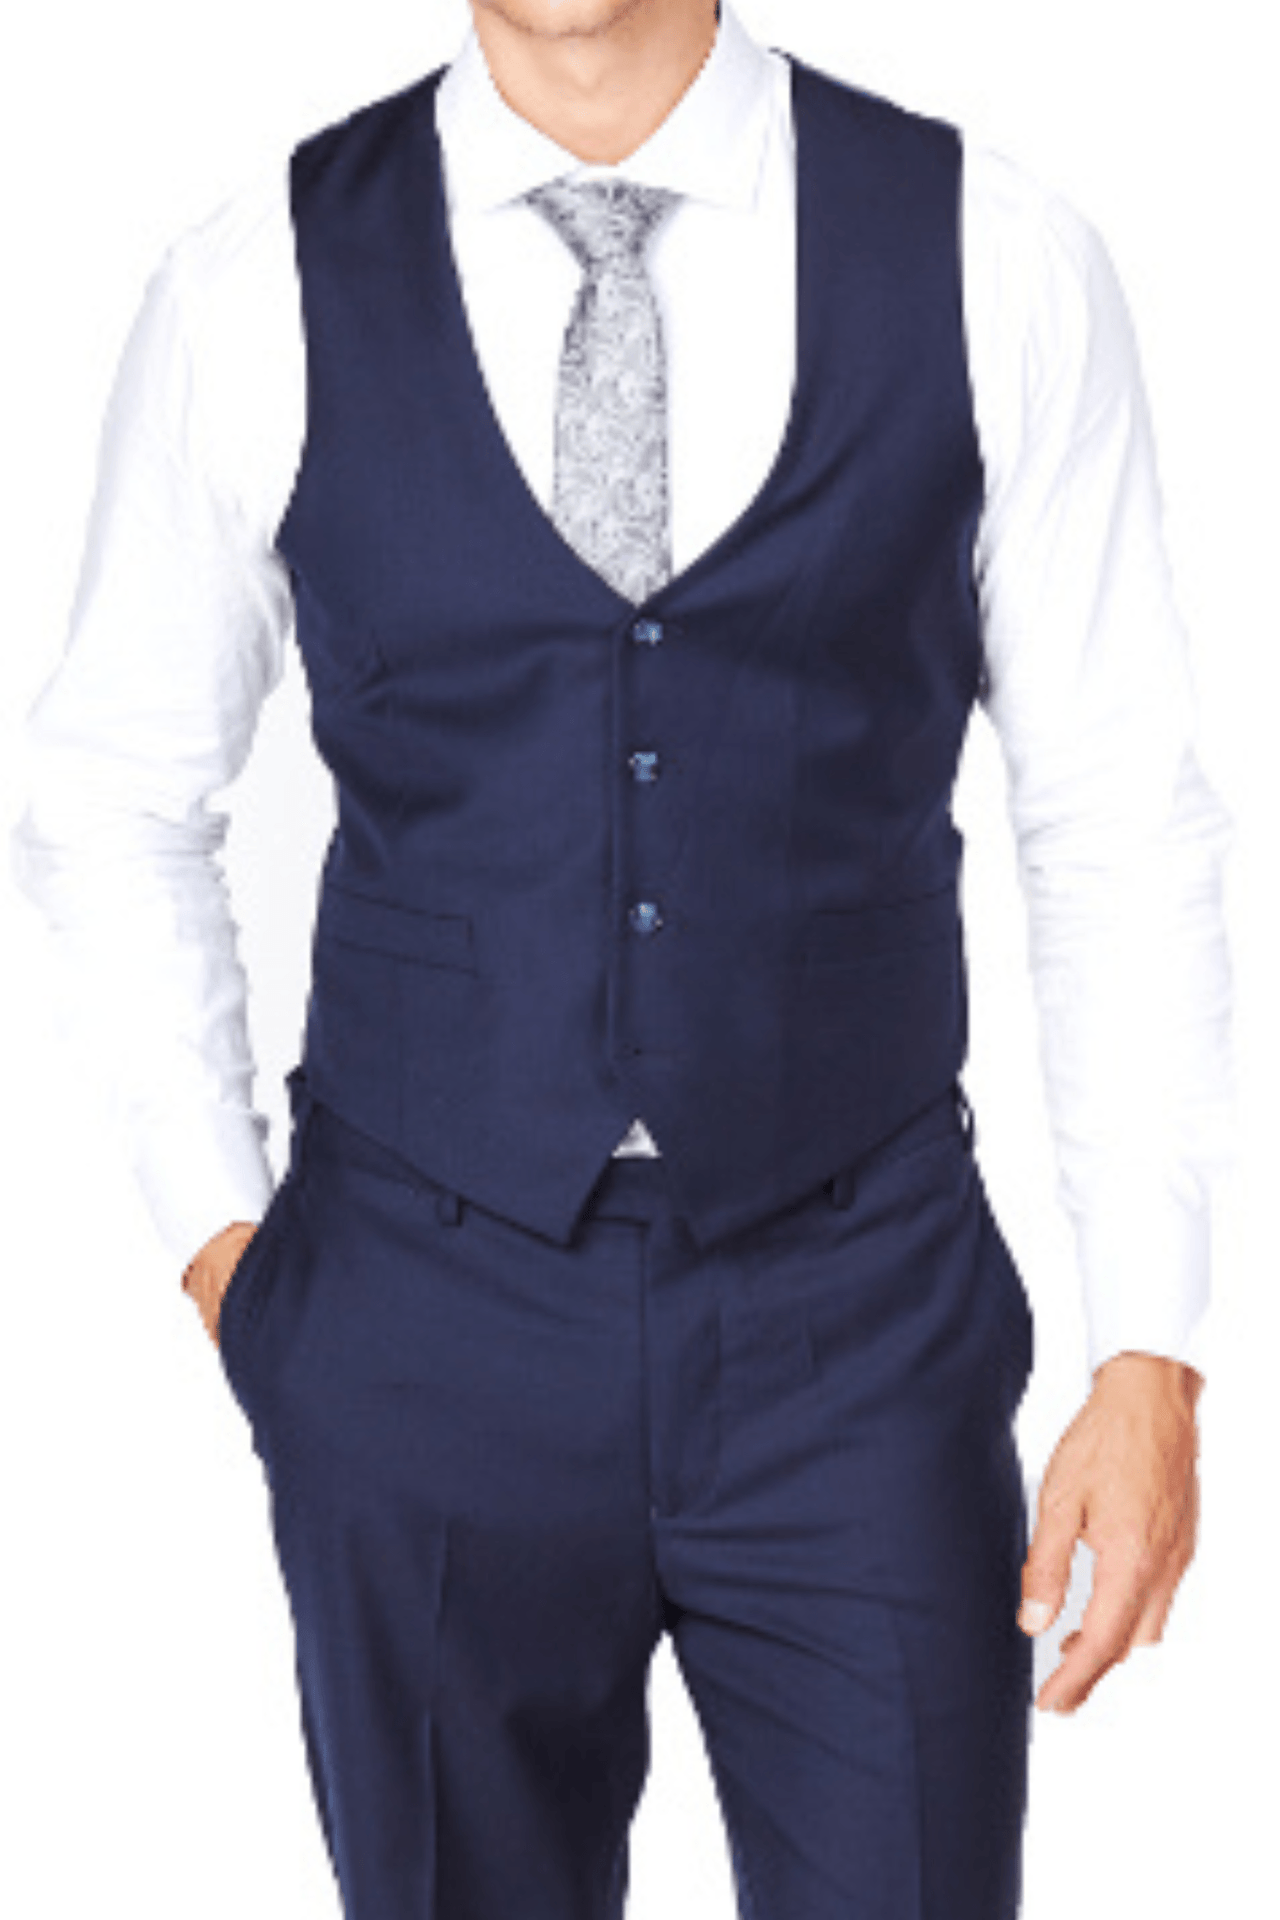 Low Cut Navy Luxurious Italian Wool Collection Vest - Tomasso Black